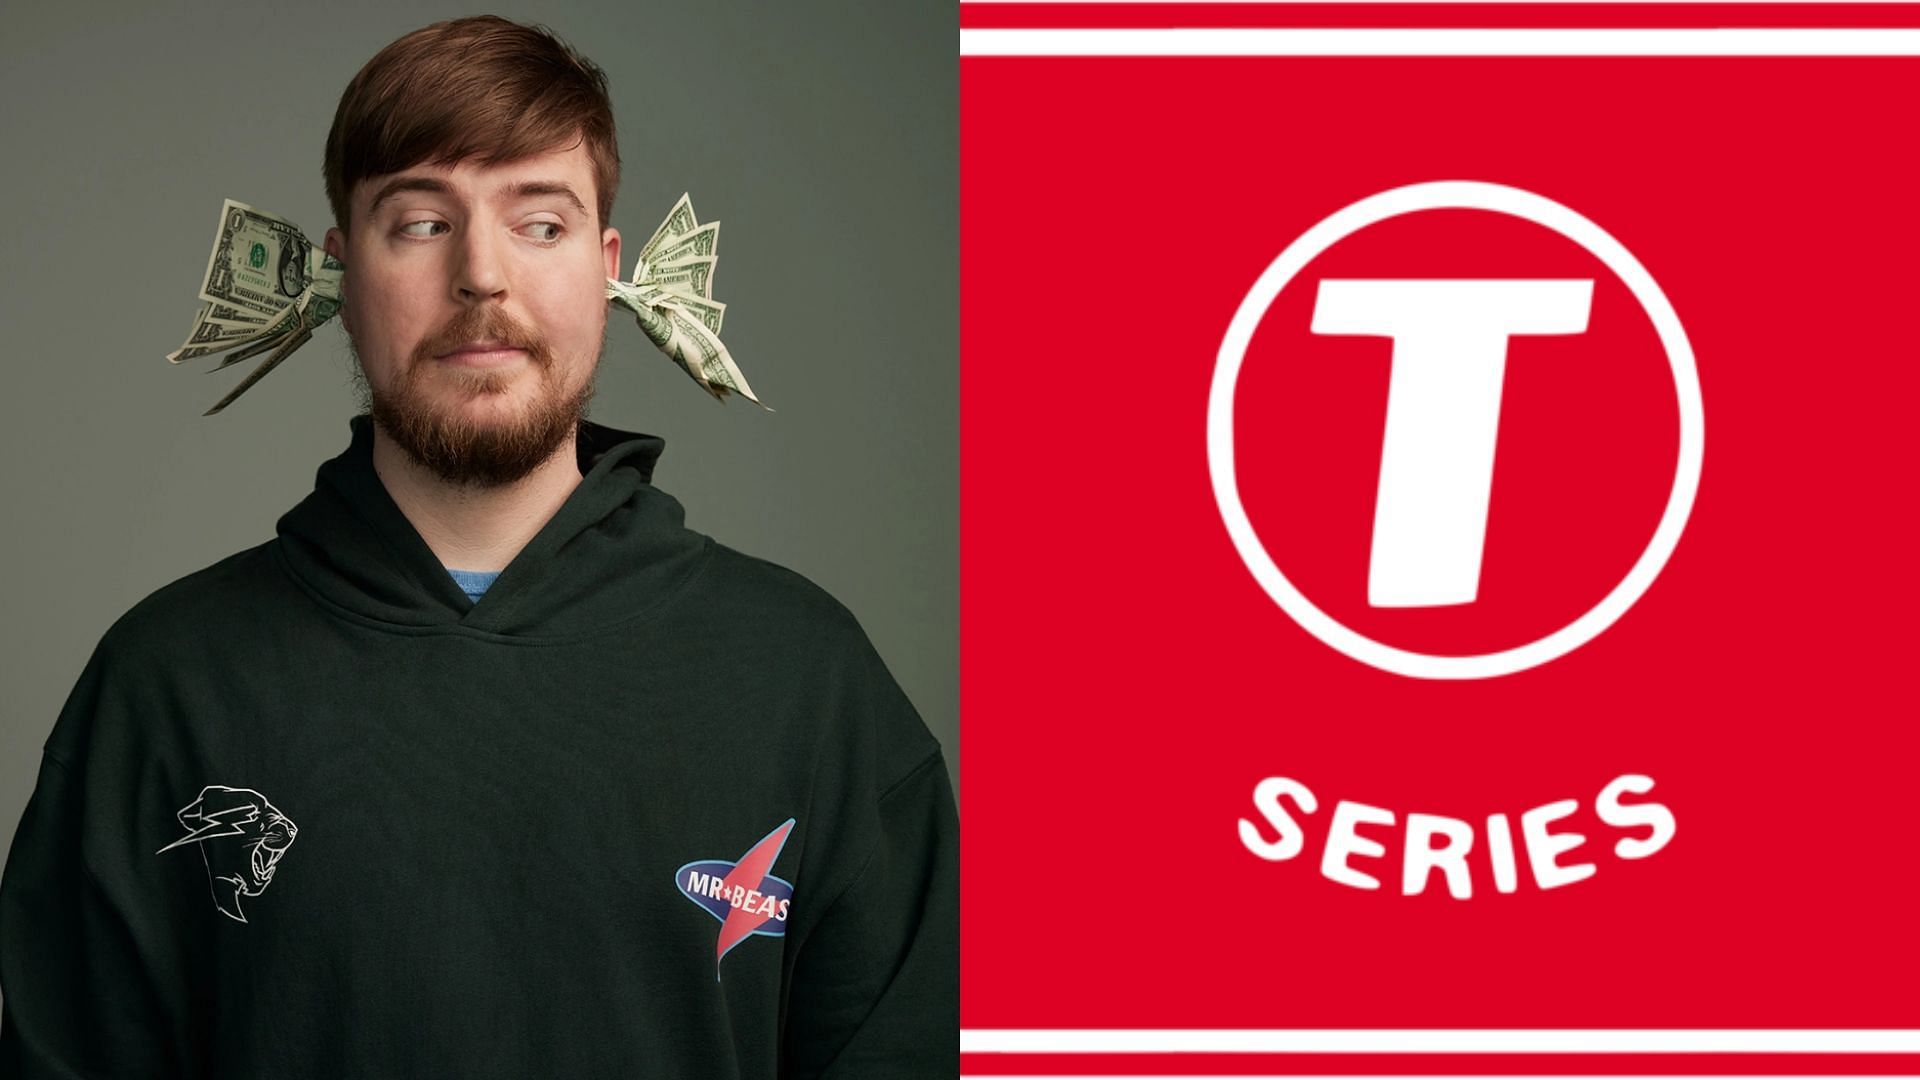 MrBeast claims he'll easily overtake T-Series on , says